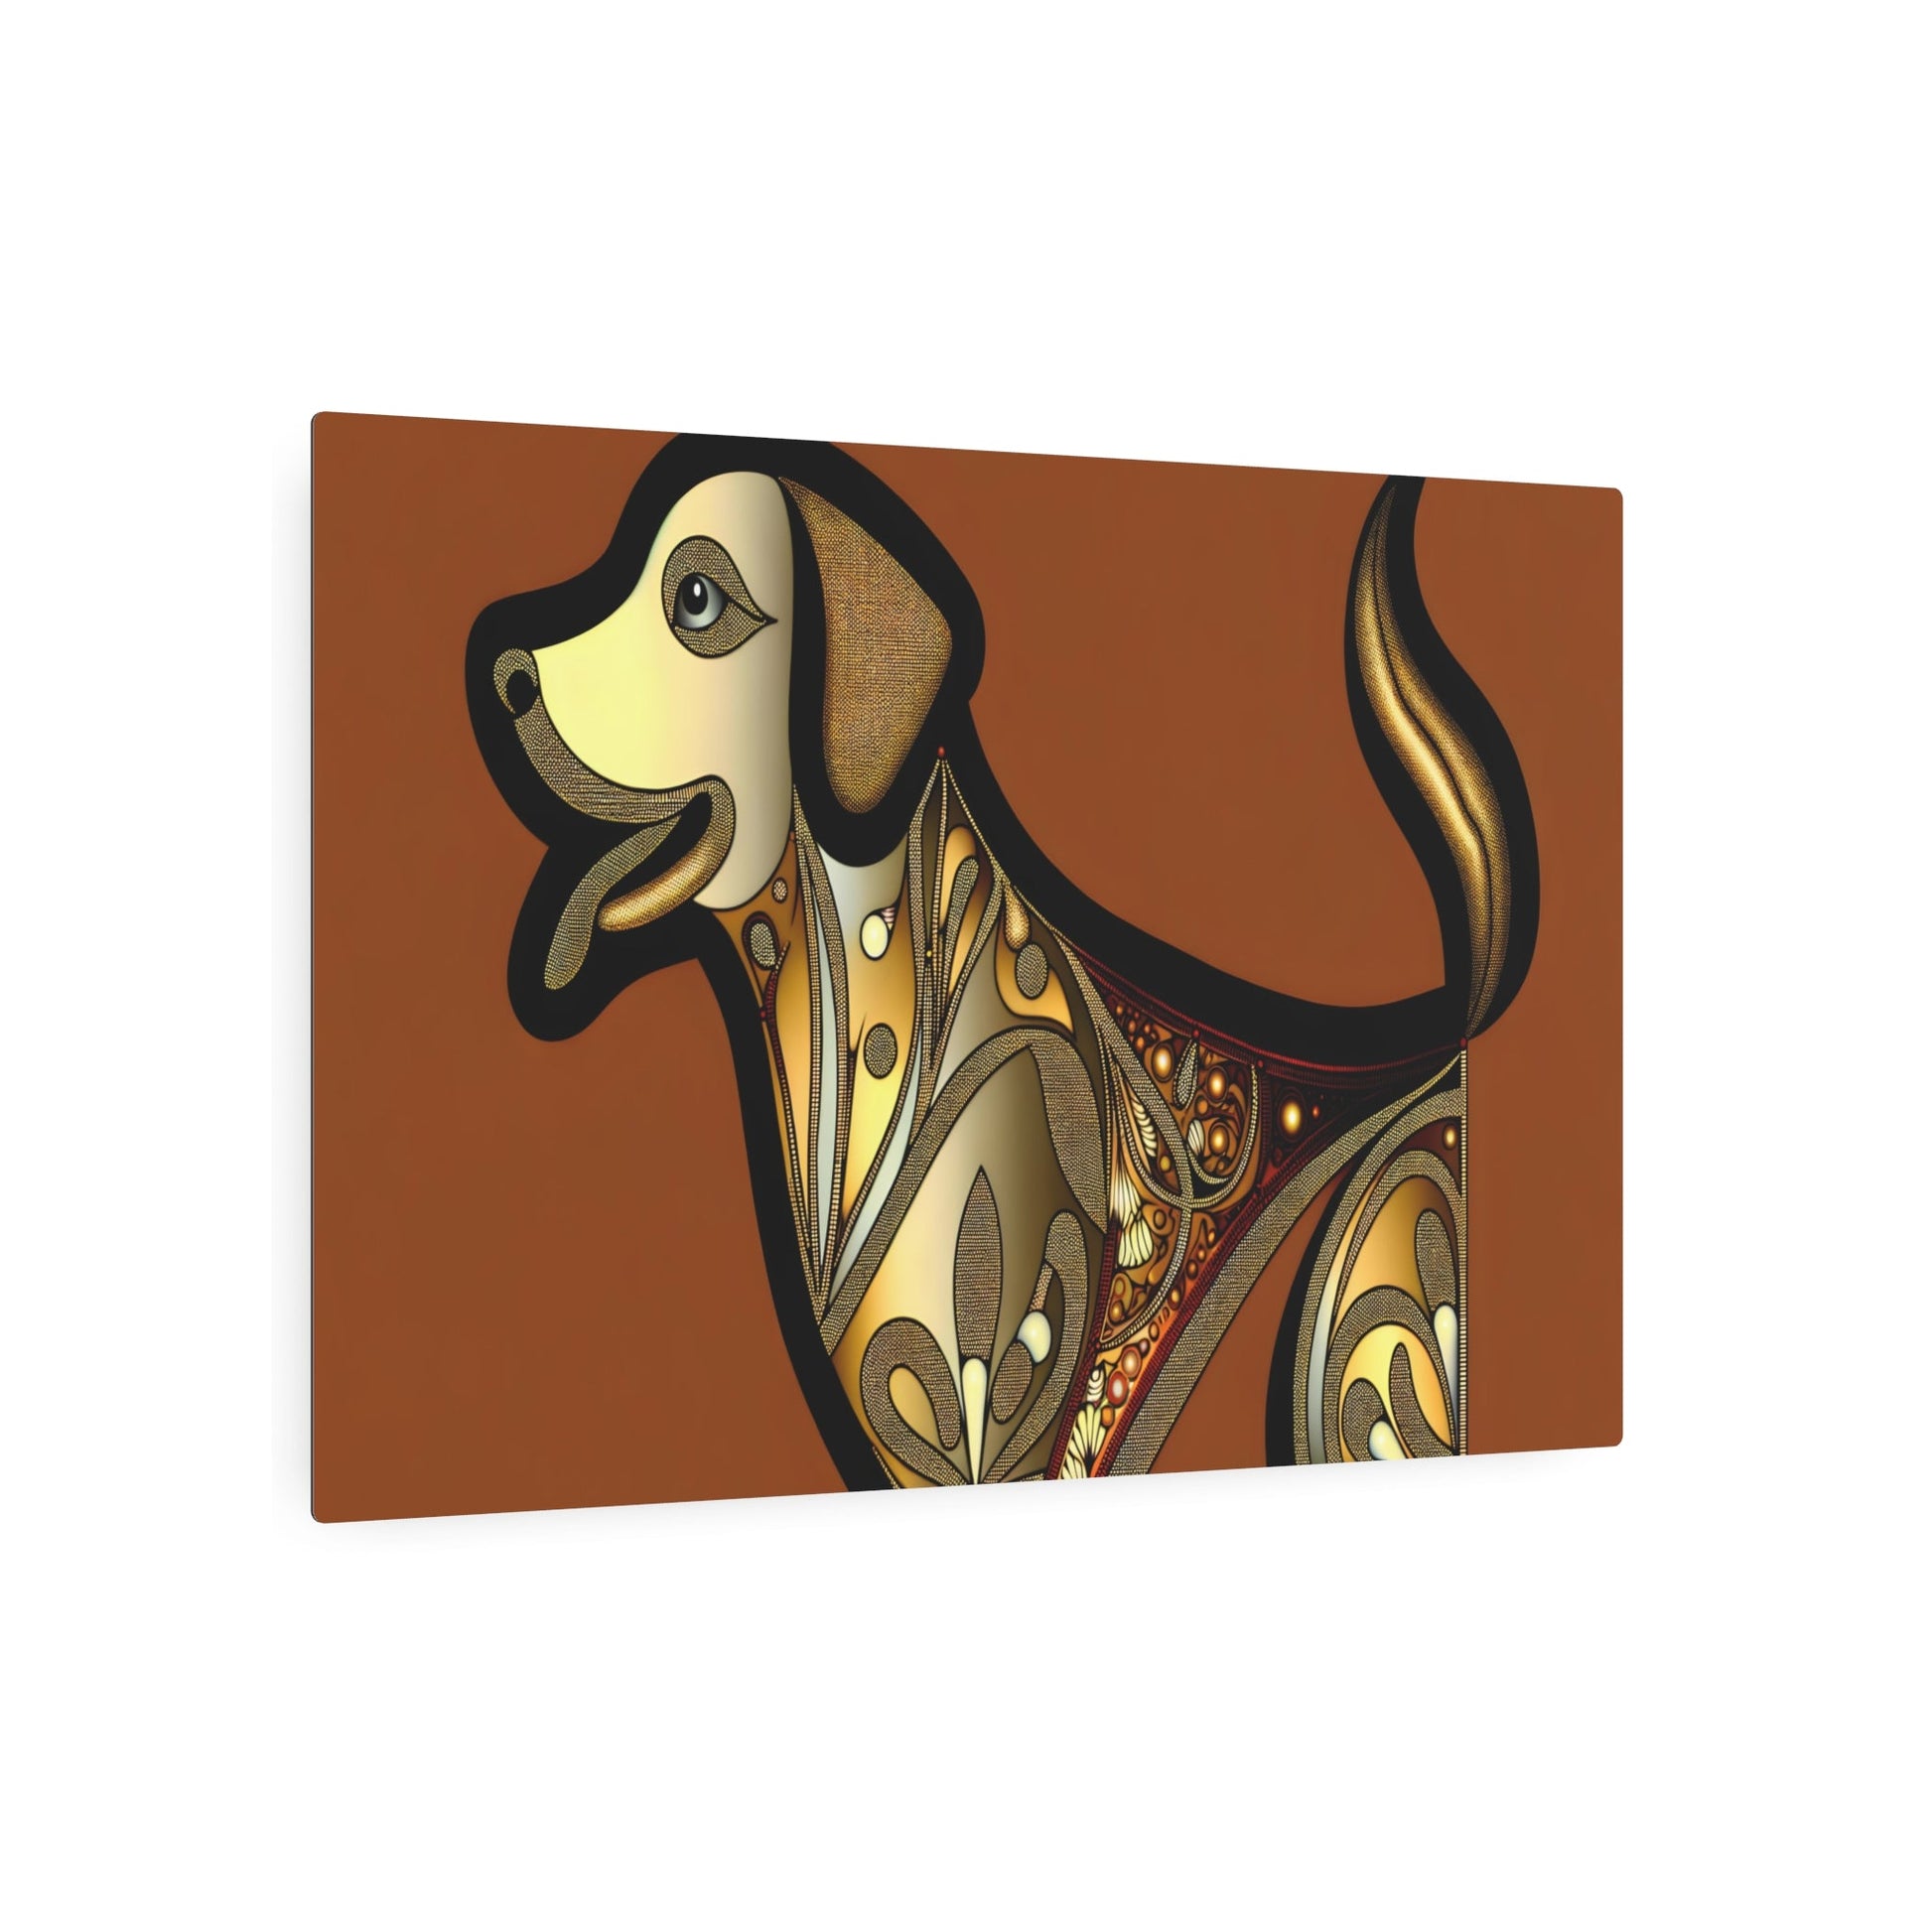 Metal Poster Art | "Byzantine Art Style Dog Illustration with Gold Detailing and Mosaic Structures - Non-Western & Global Styles Collection" - Metal Poster Art 36″ x 24″ (Horizontal) 0.12''